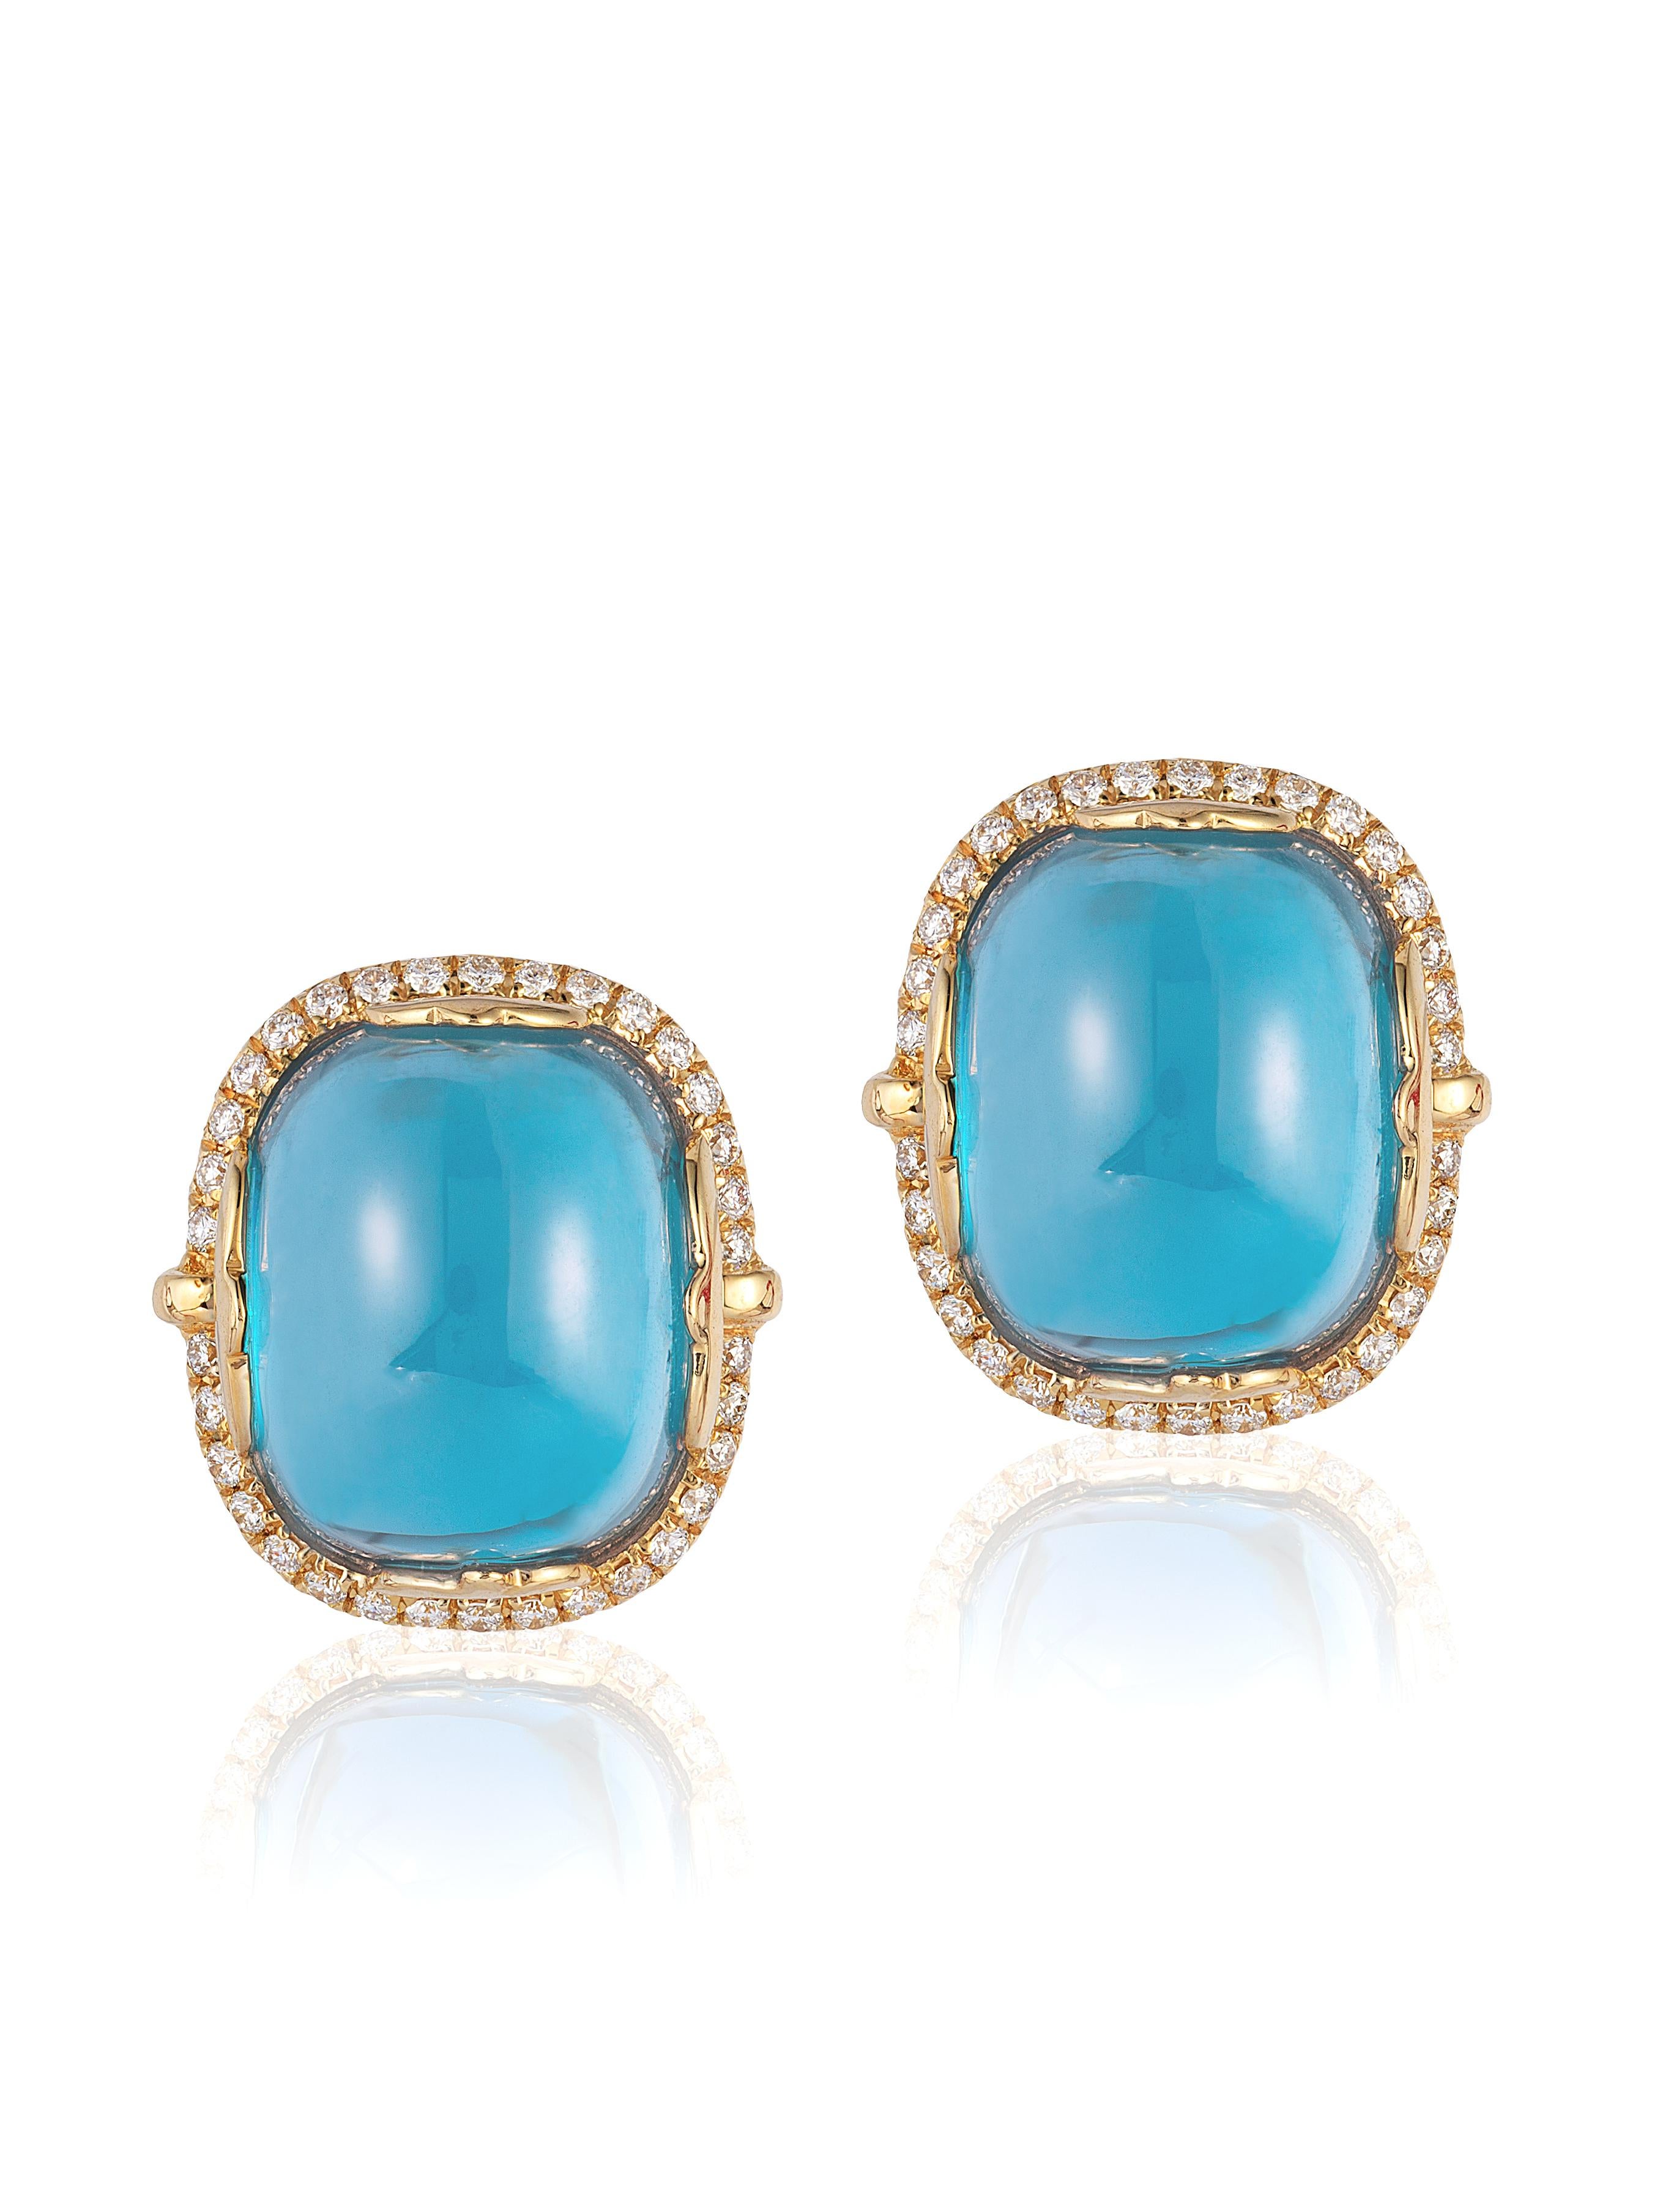 Contemporary Goshwara Blue Topaz Cushion Cabochon with Diamond Earrings For Sale